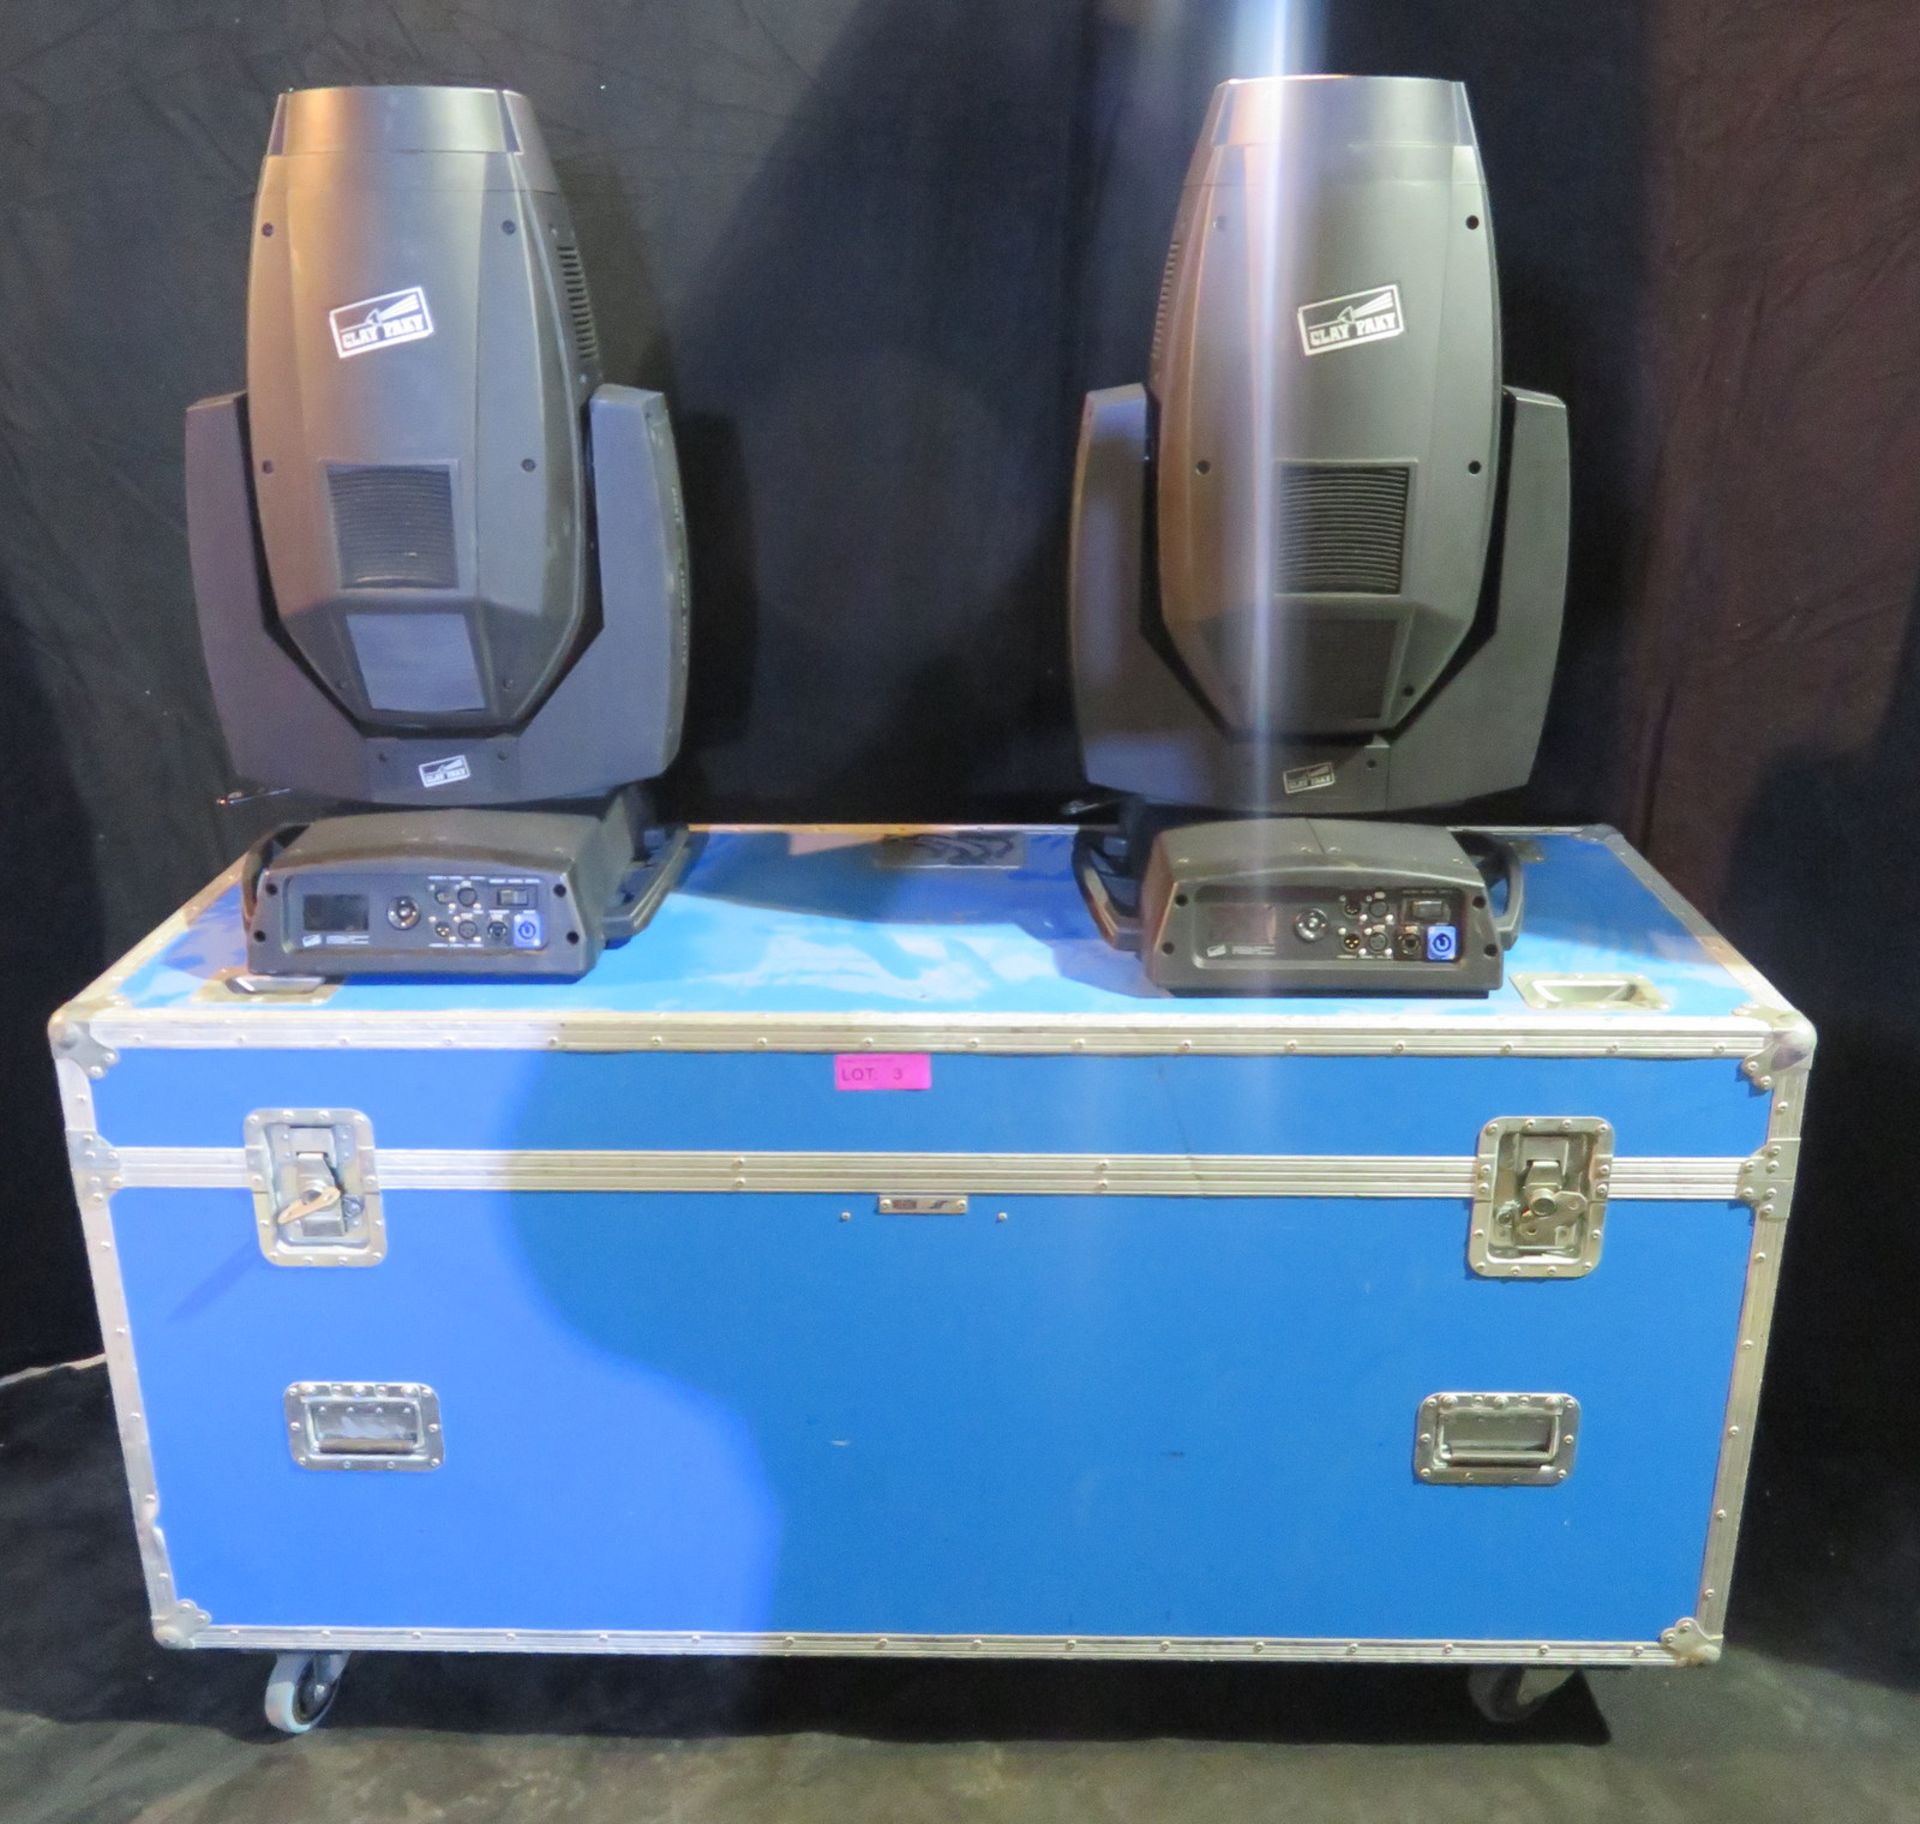 Pair of Clay Paky Alpha Spot HPE 1500 in twin flightcase